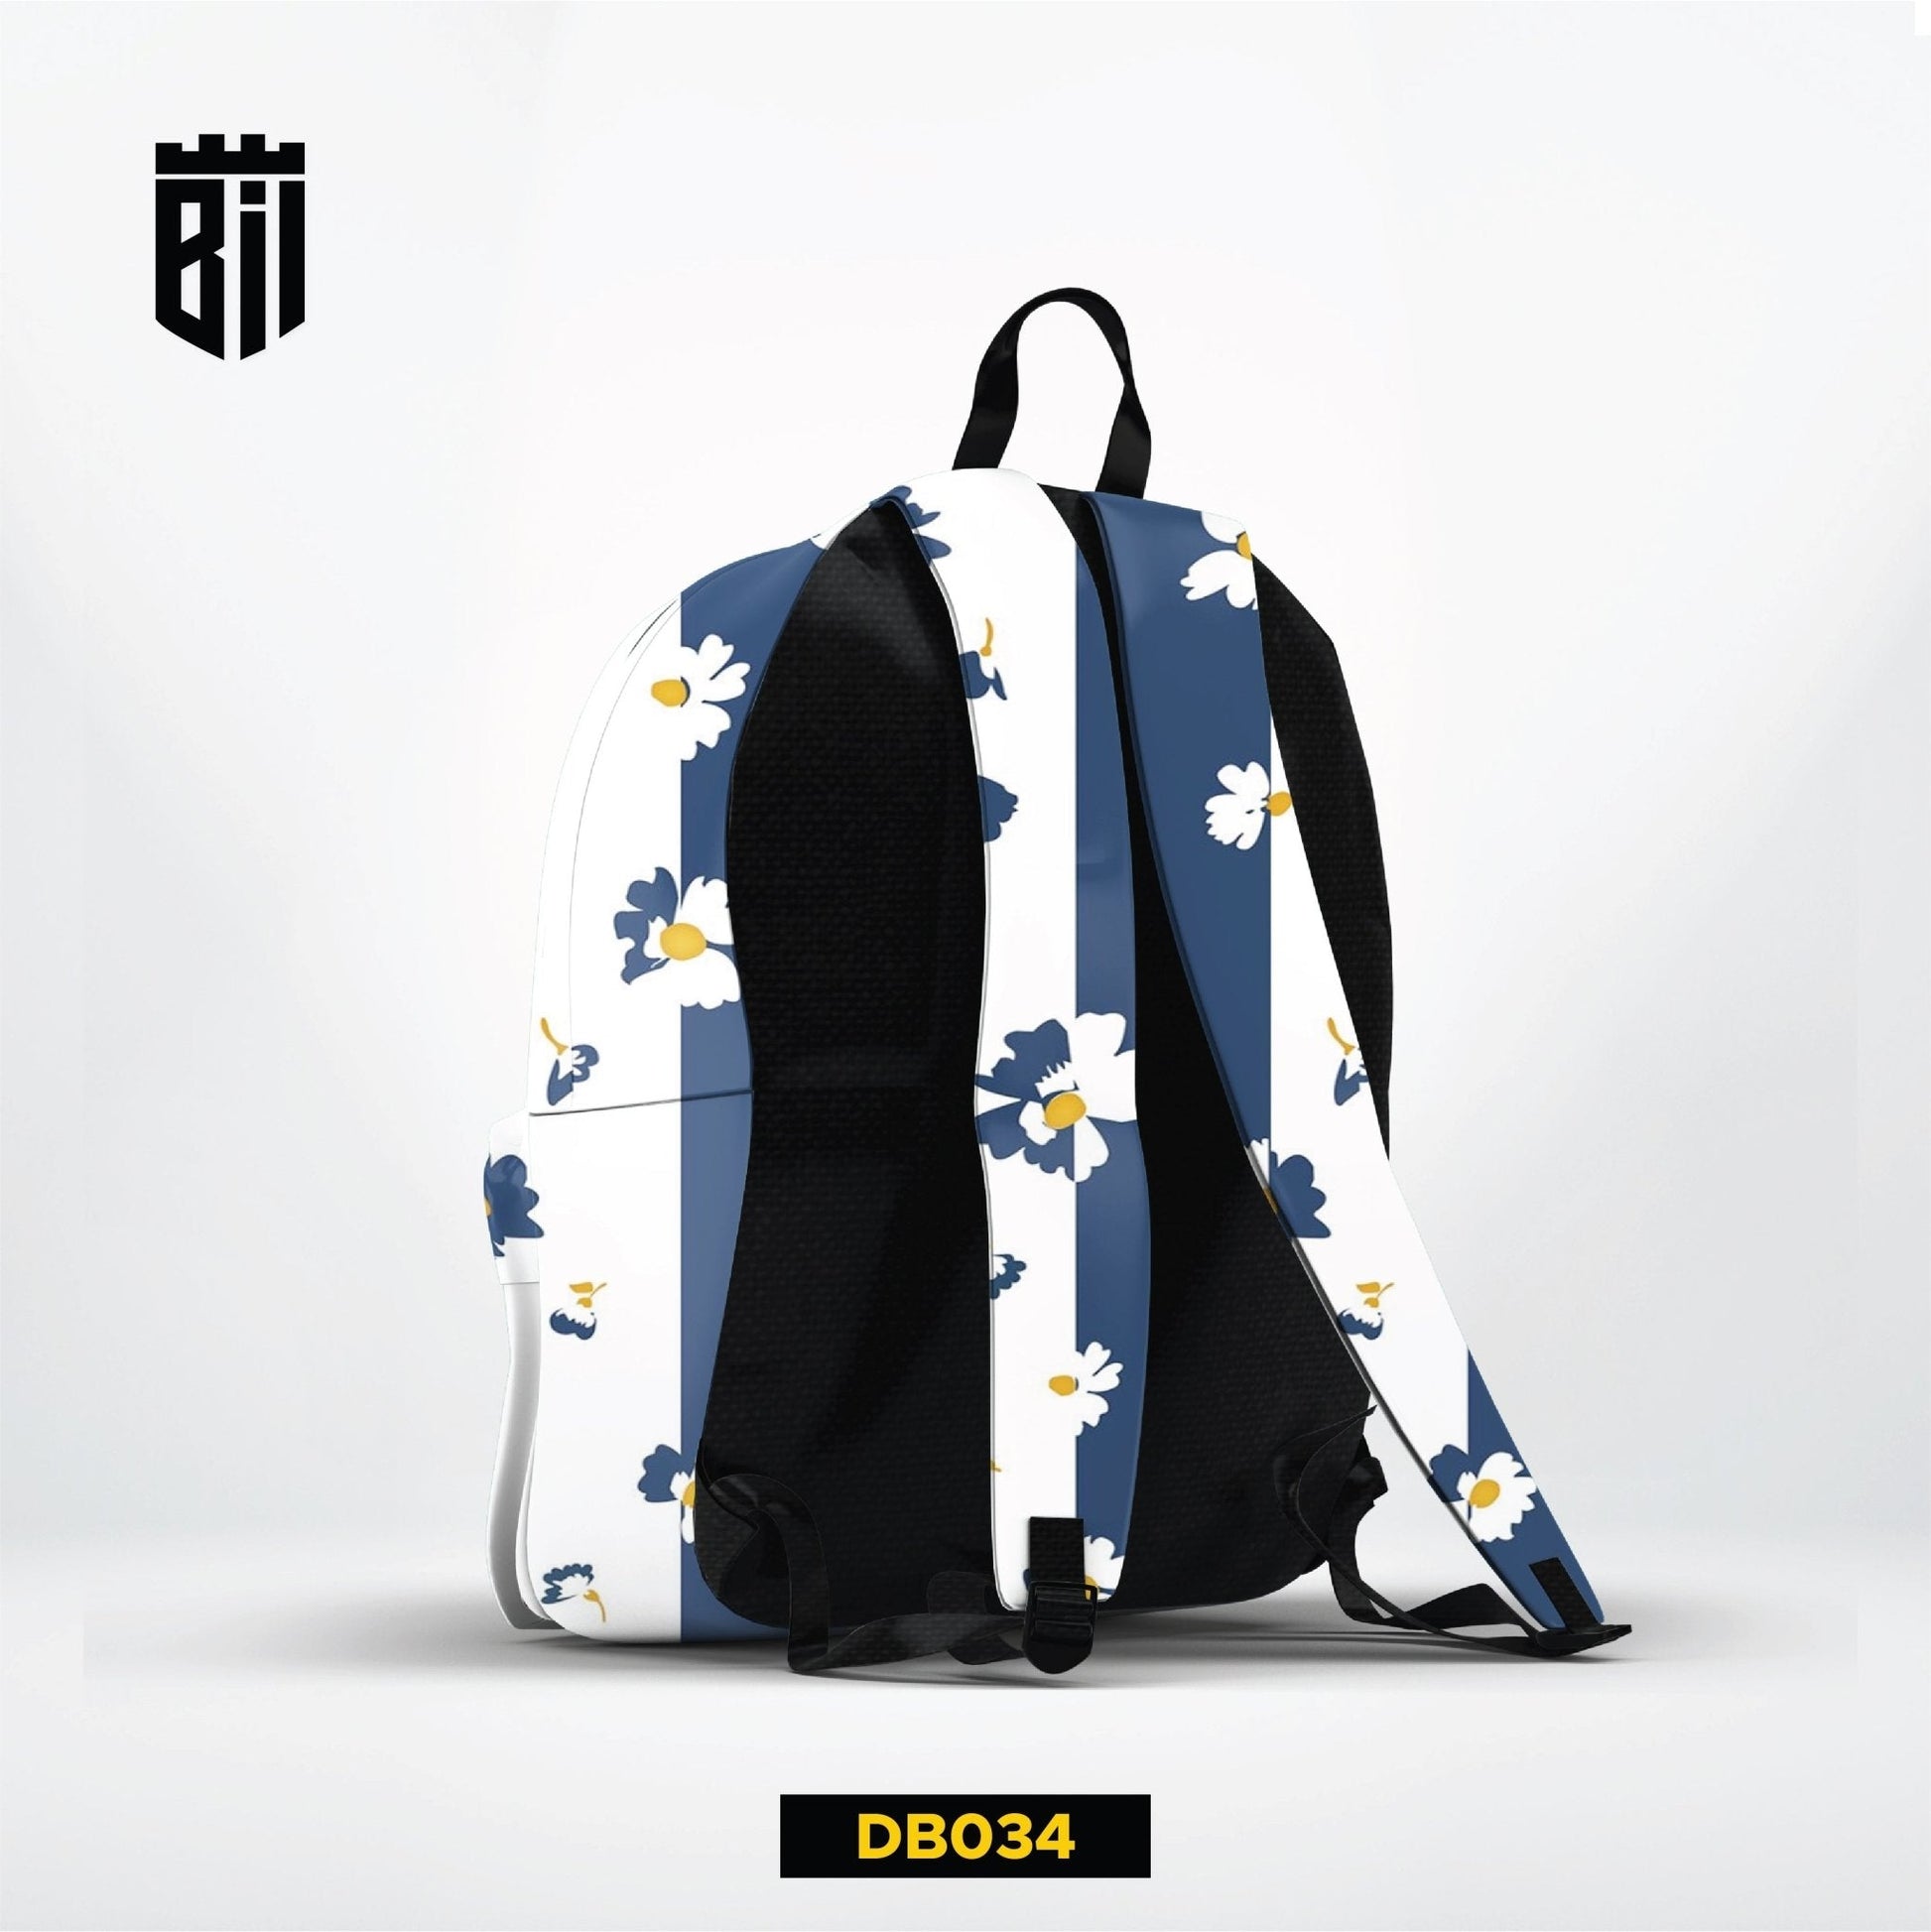 DB034 Striped Floral Allover Printed Backpack - BREACHIT